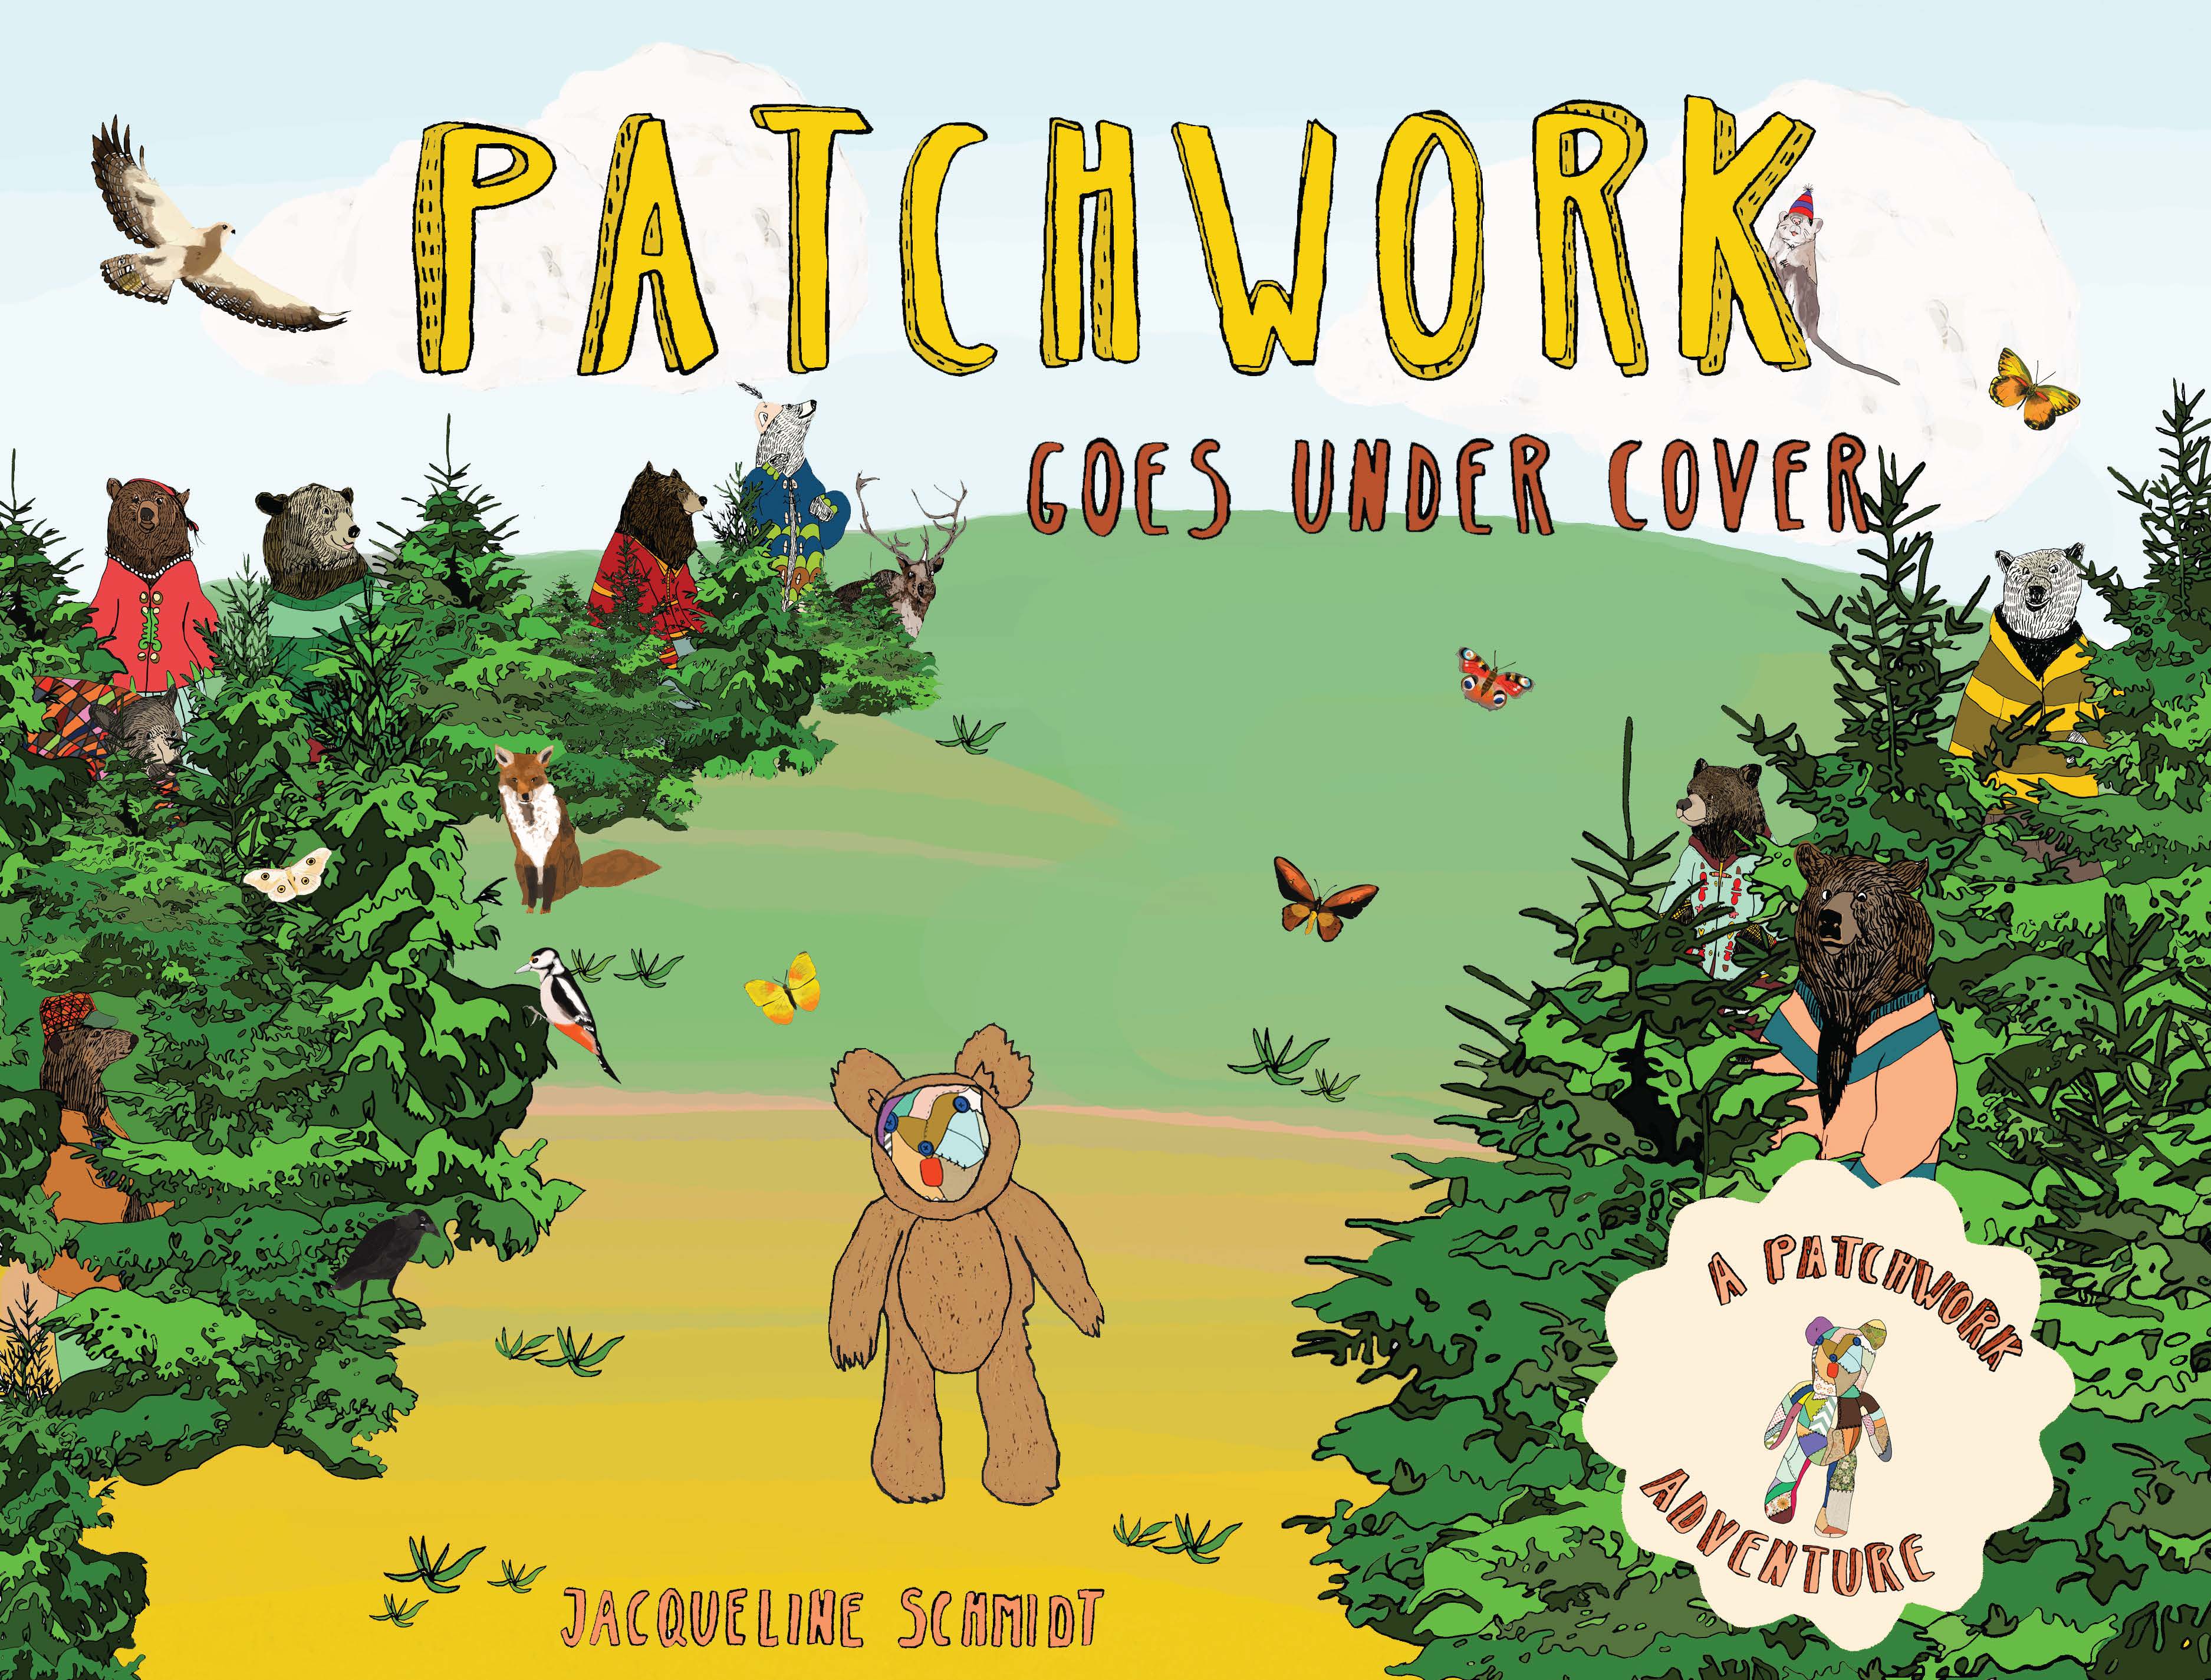 POW! Kids Sunday Story Time: Patchwork Goes Under Cover by Jacqueline Schmidt